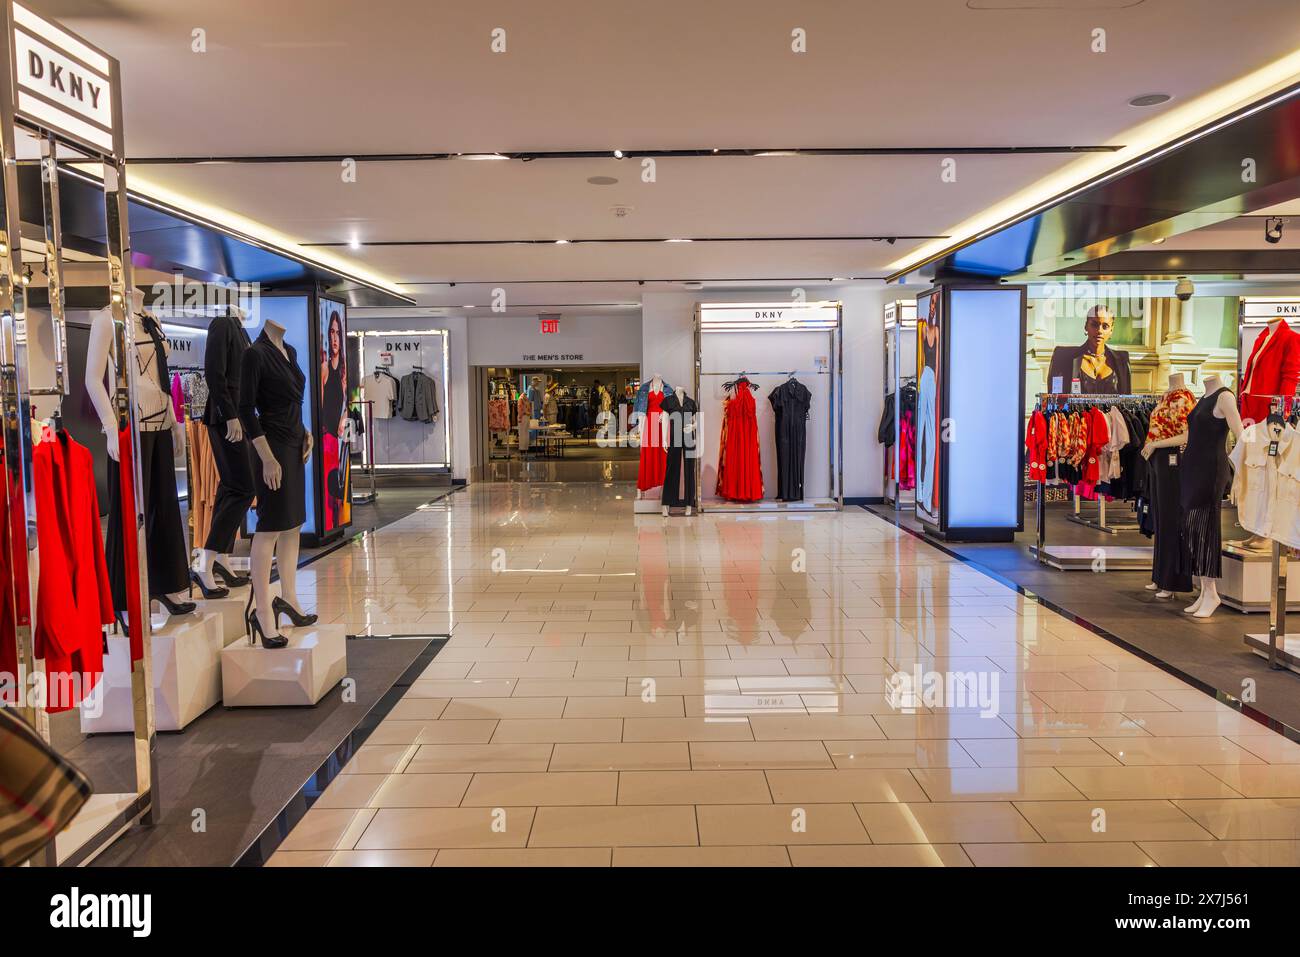 View of the interior of Macy's store with the DKNY women's clothing department. New York. USA. Stock Photo